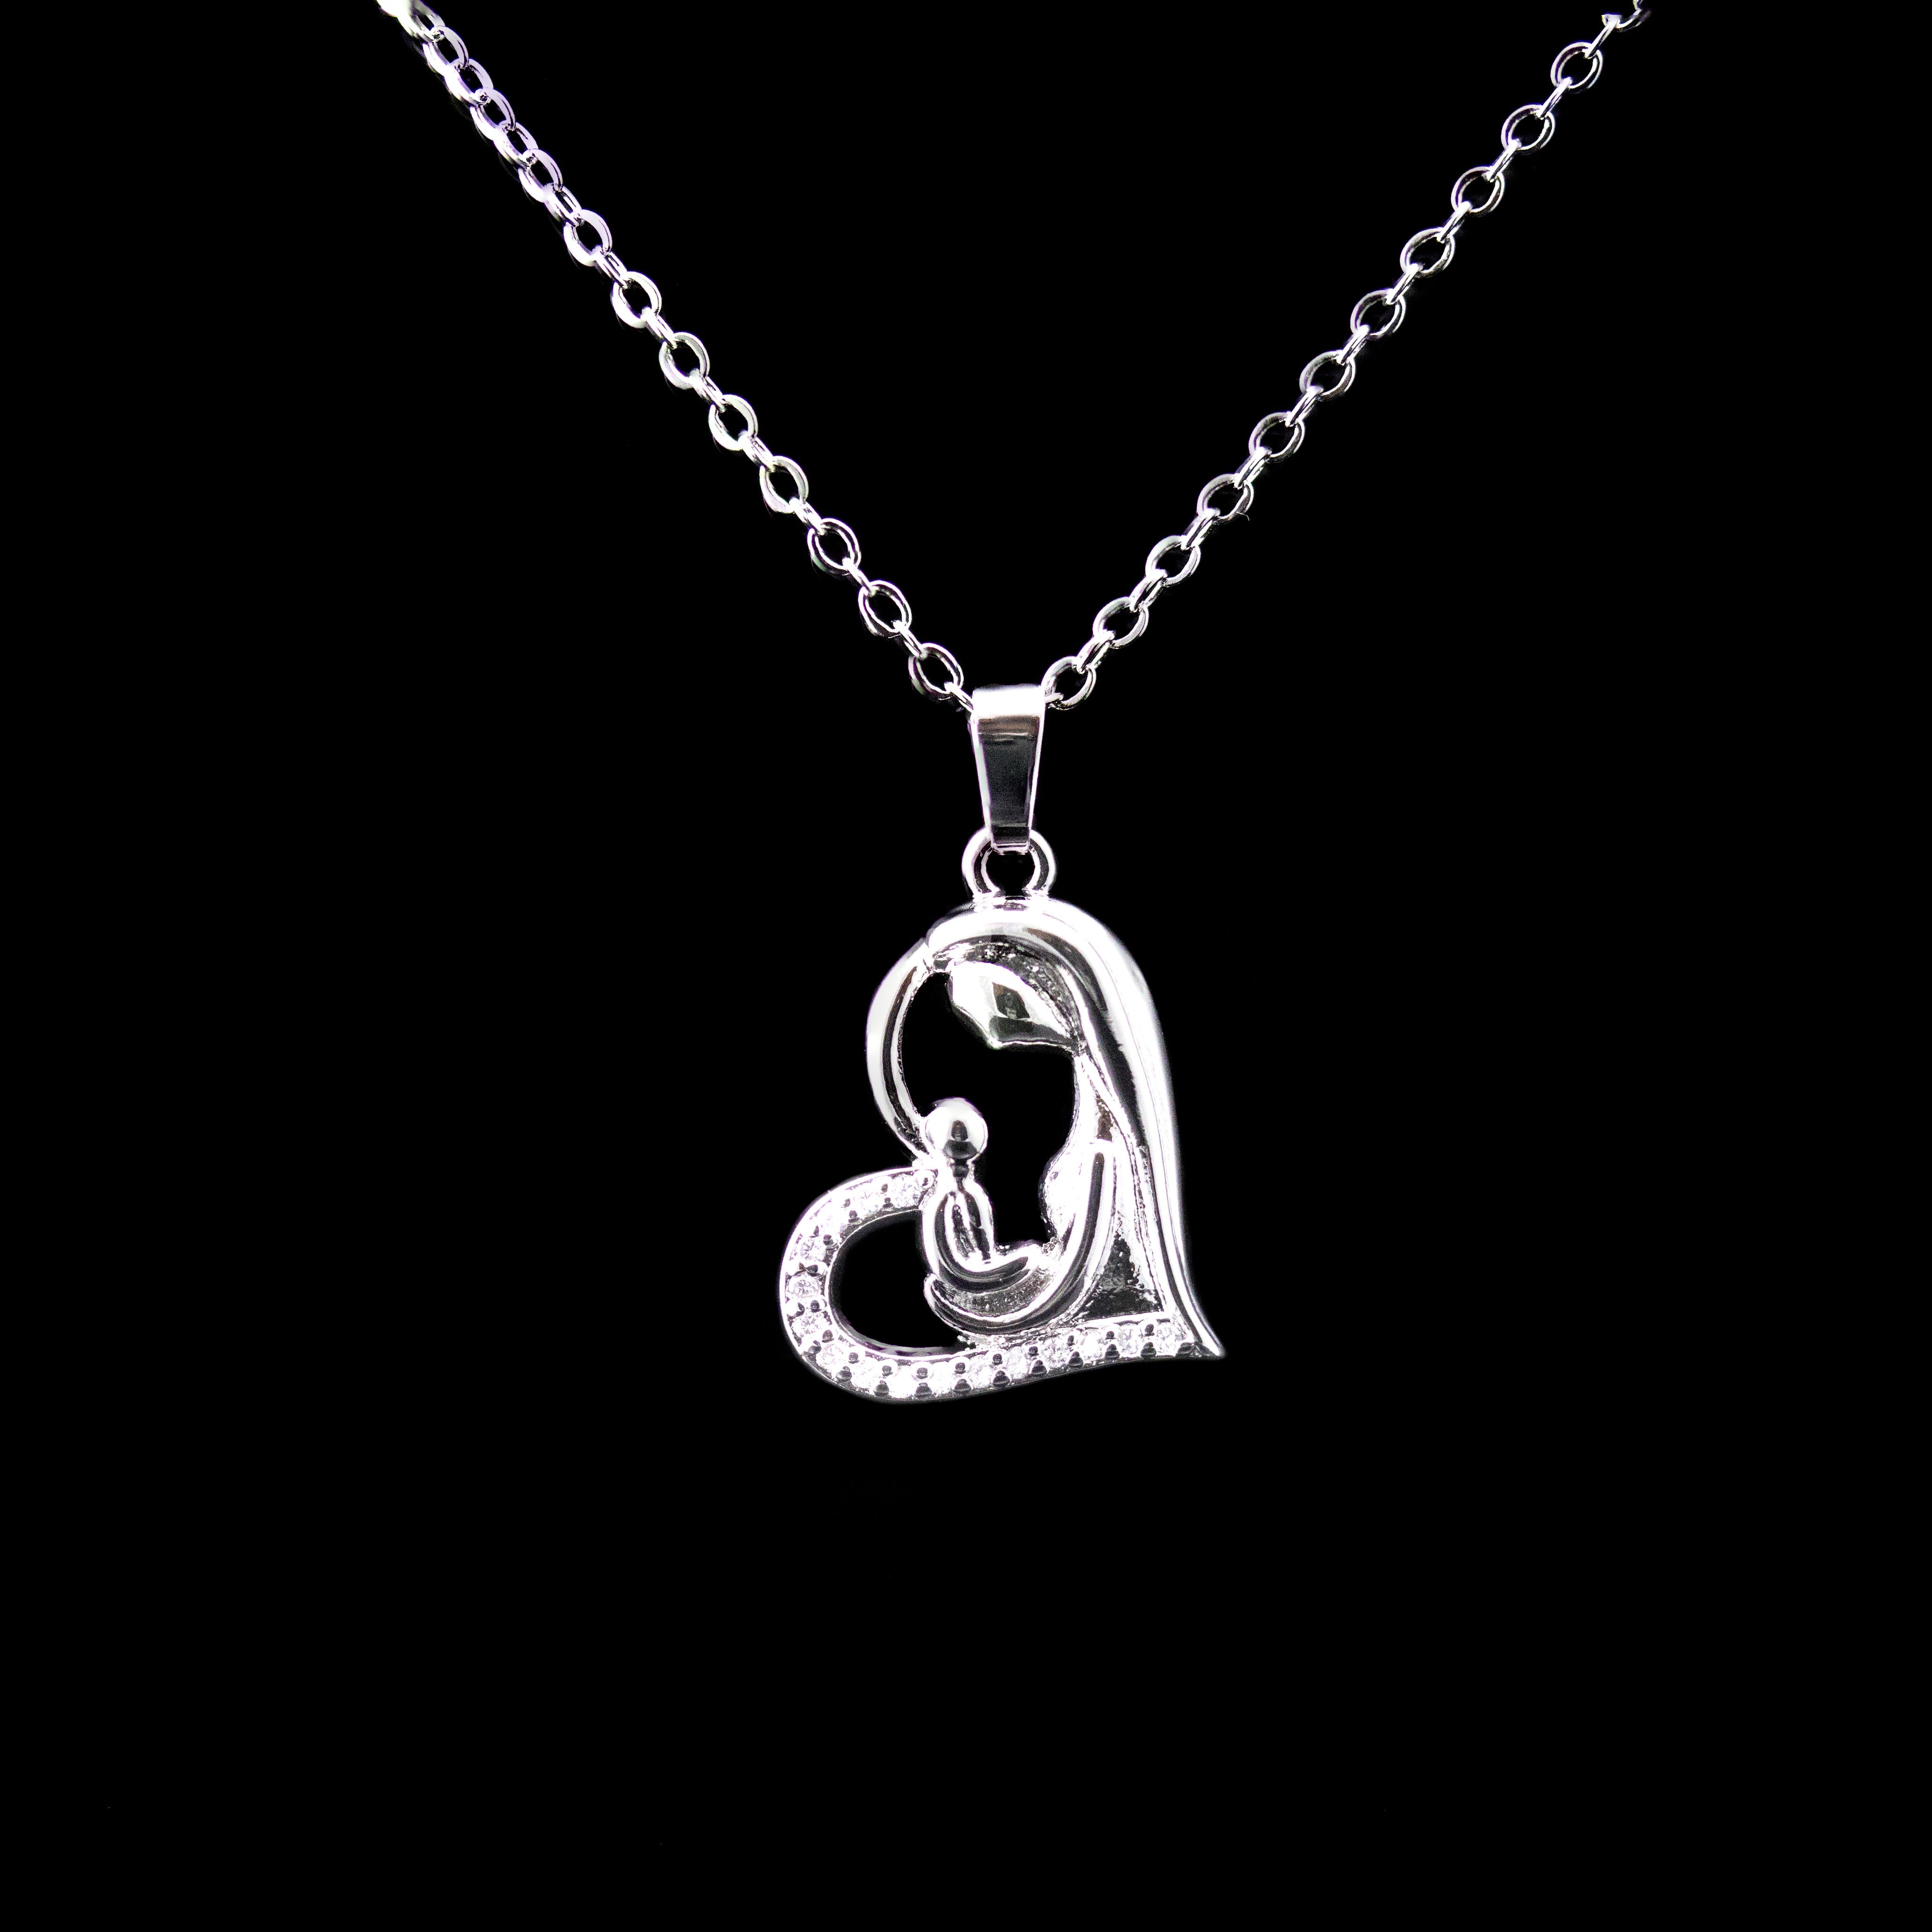 Handmade High Quality Mother and Child Loving Heart Necklace Online